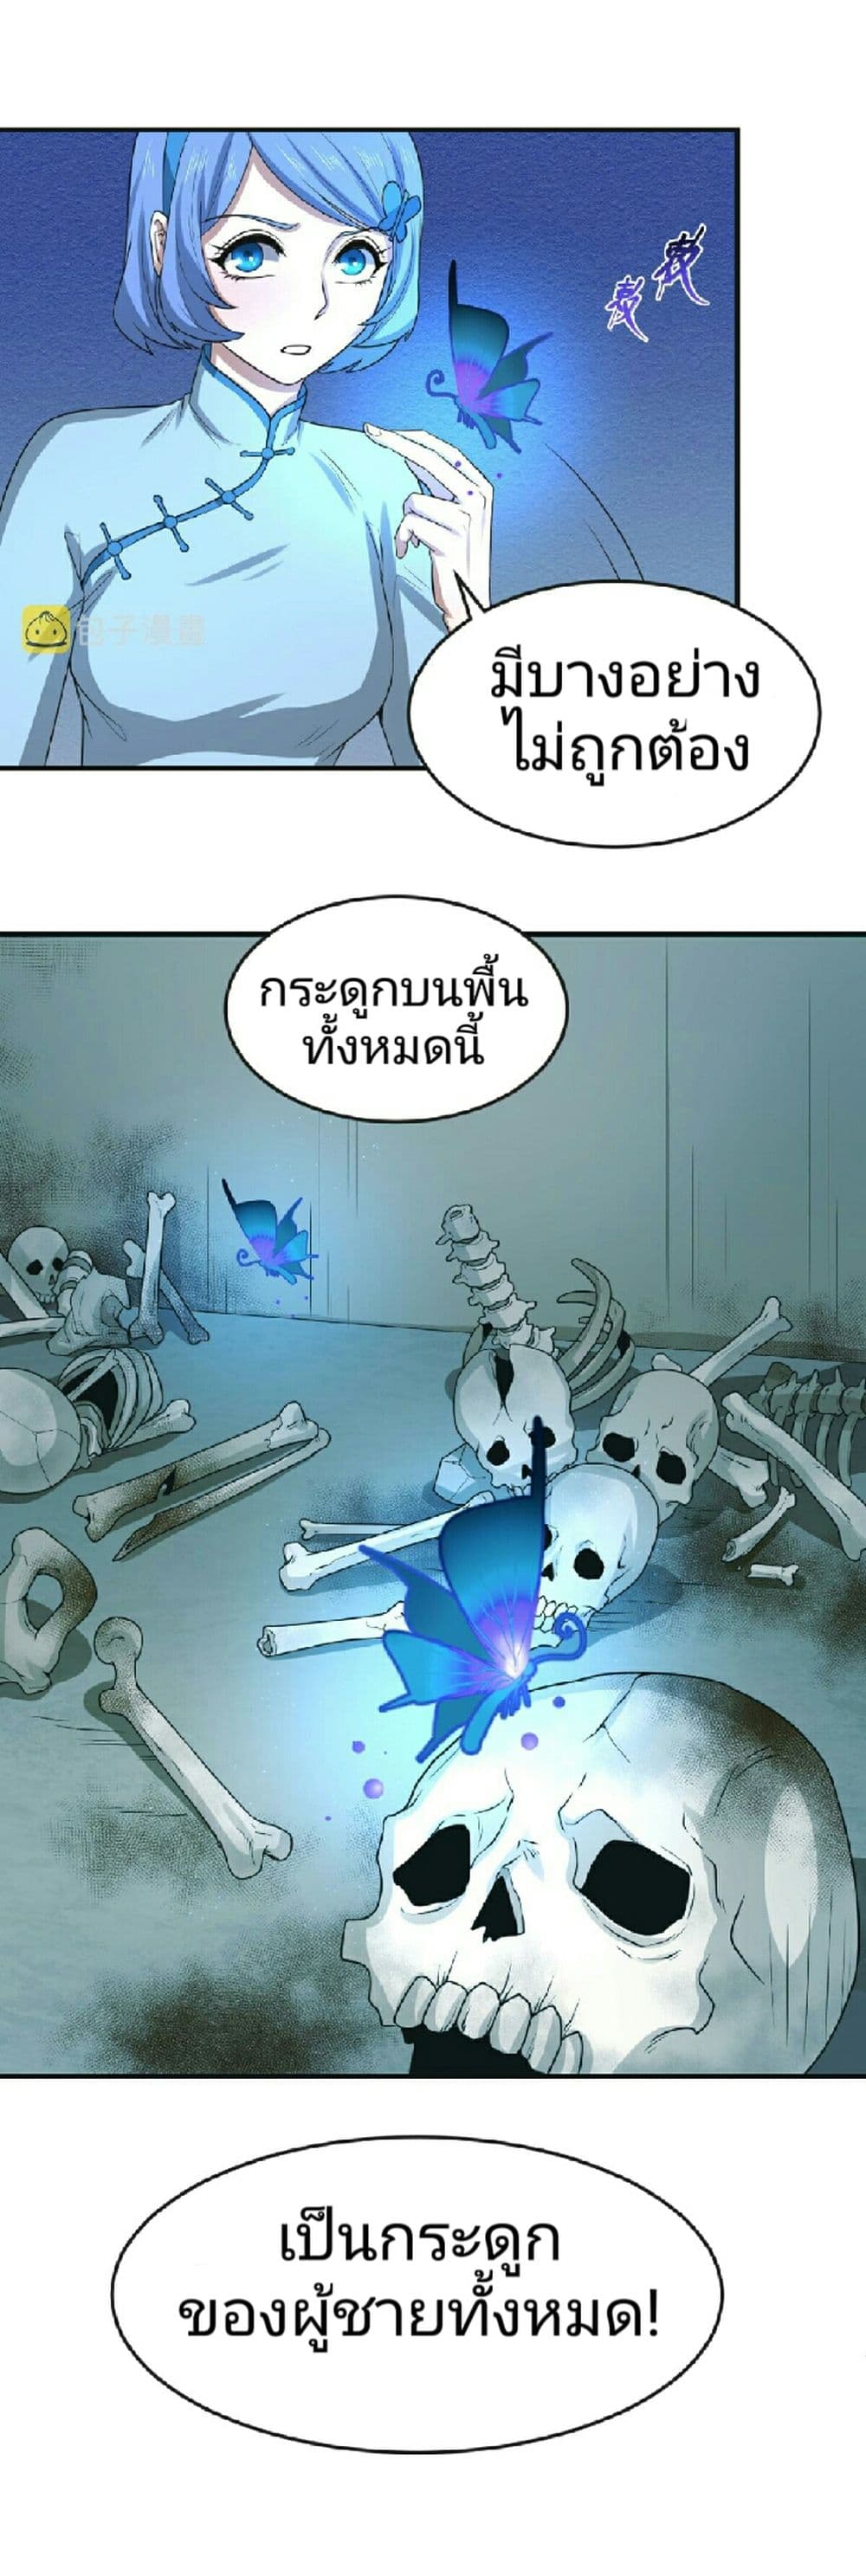 The Age of Ghost Spirits à¸à¸­à¸à¸à¸µà¹ 49 (38)